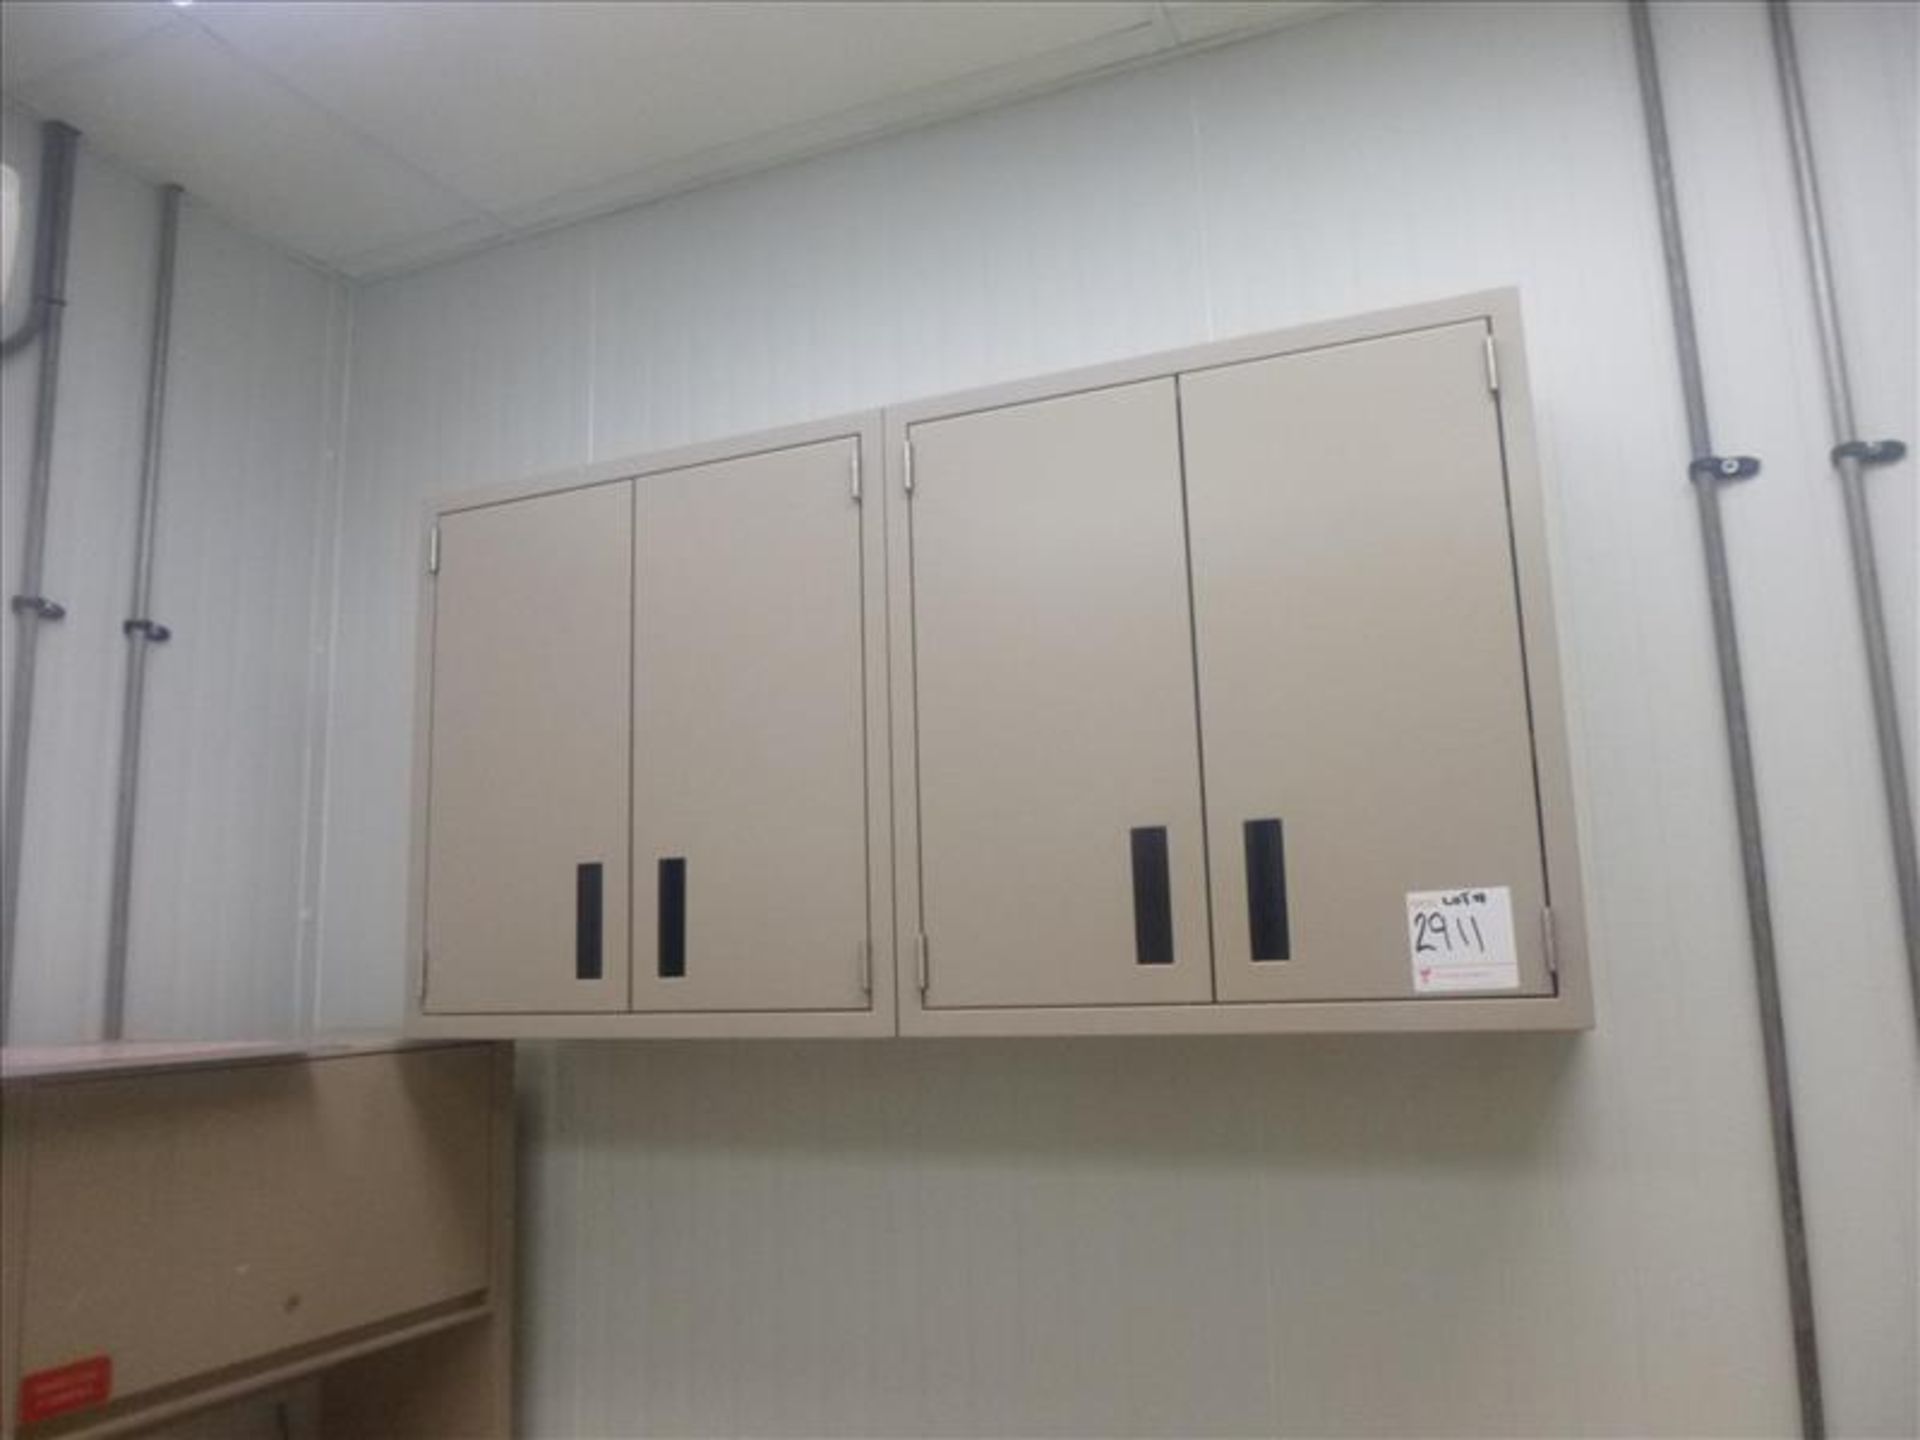 lab cabinets w/ s/s top and sink, 30 in. x 141 in. x 60 in. c/w upper cabinets [1st Floor, ACC] - Image 3 of 3